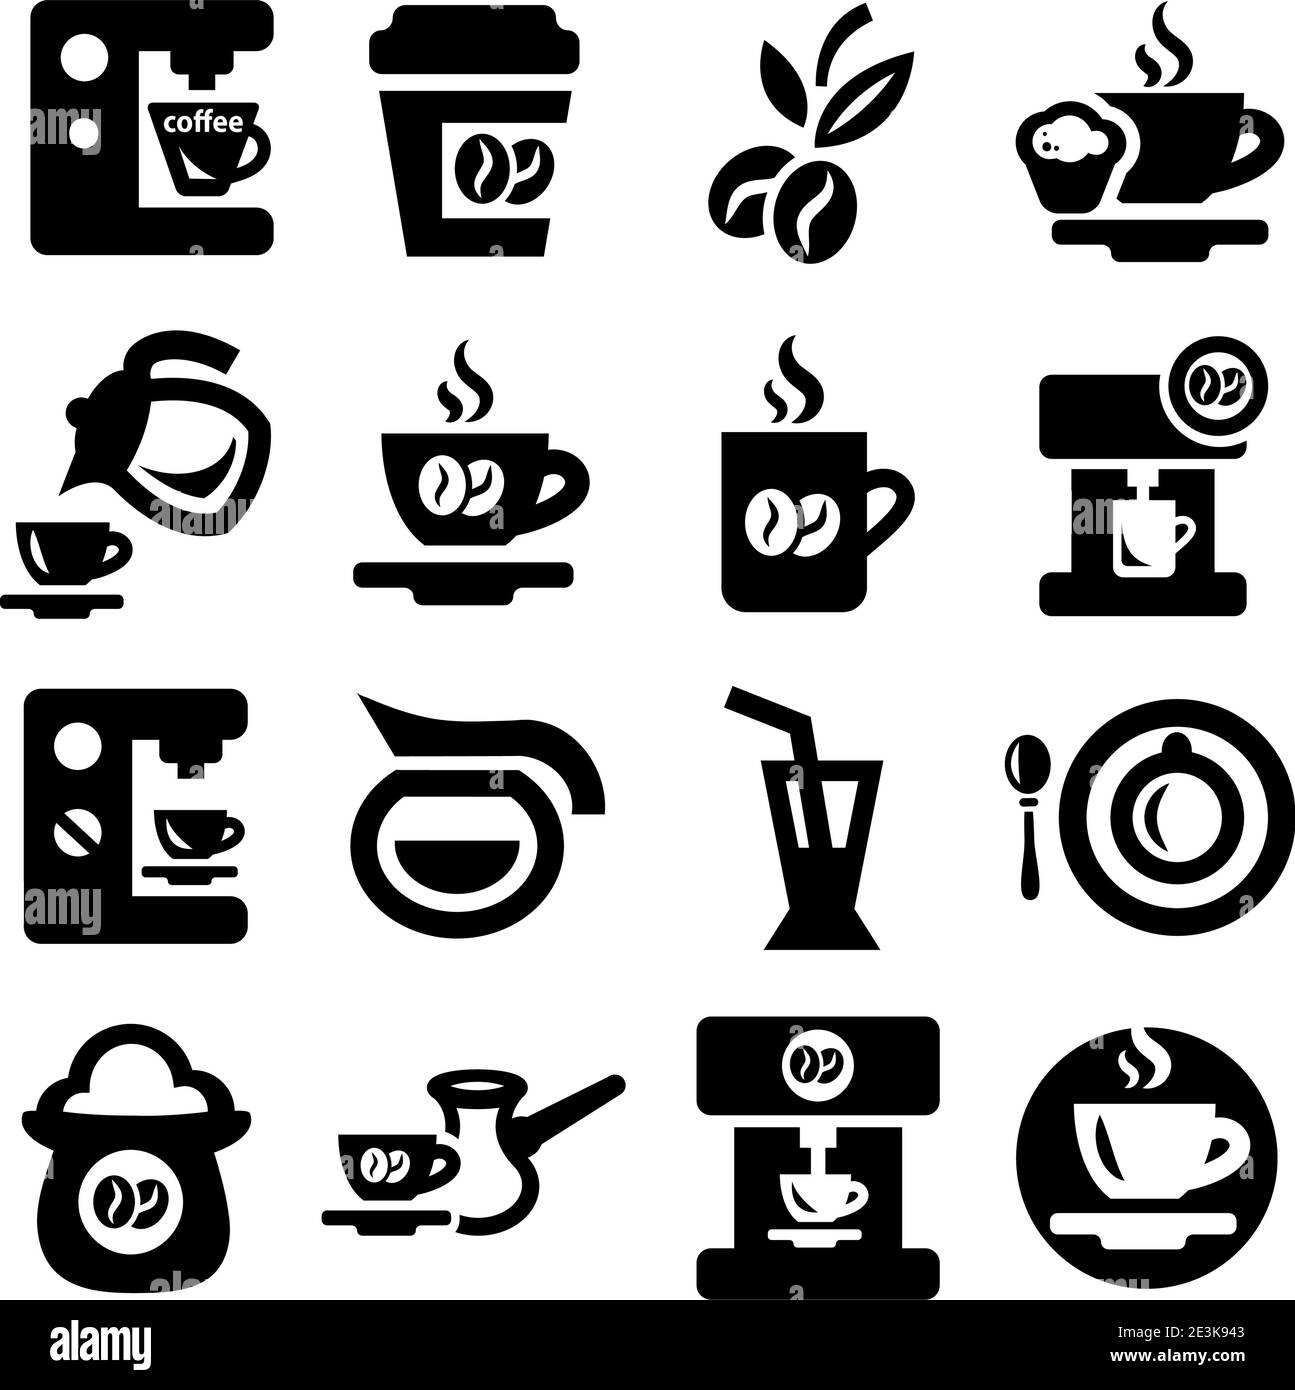 Elegant Coffee Icons Set Created For Mobile, Web And Applications. Stock Vector